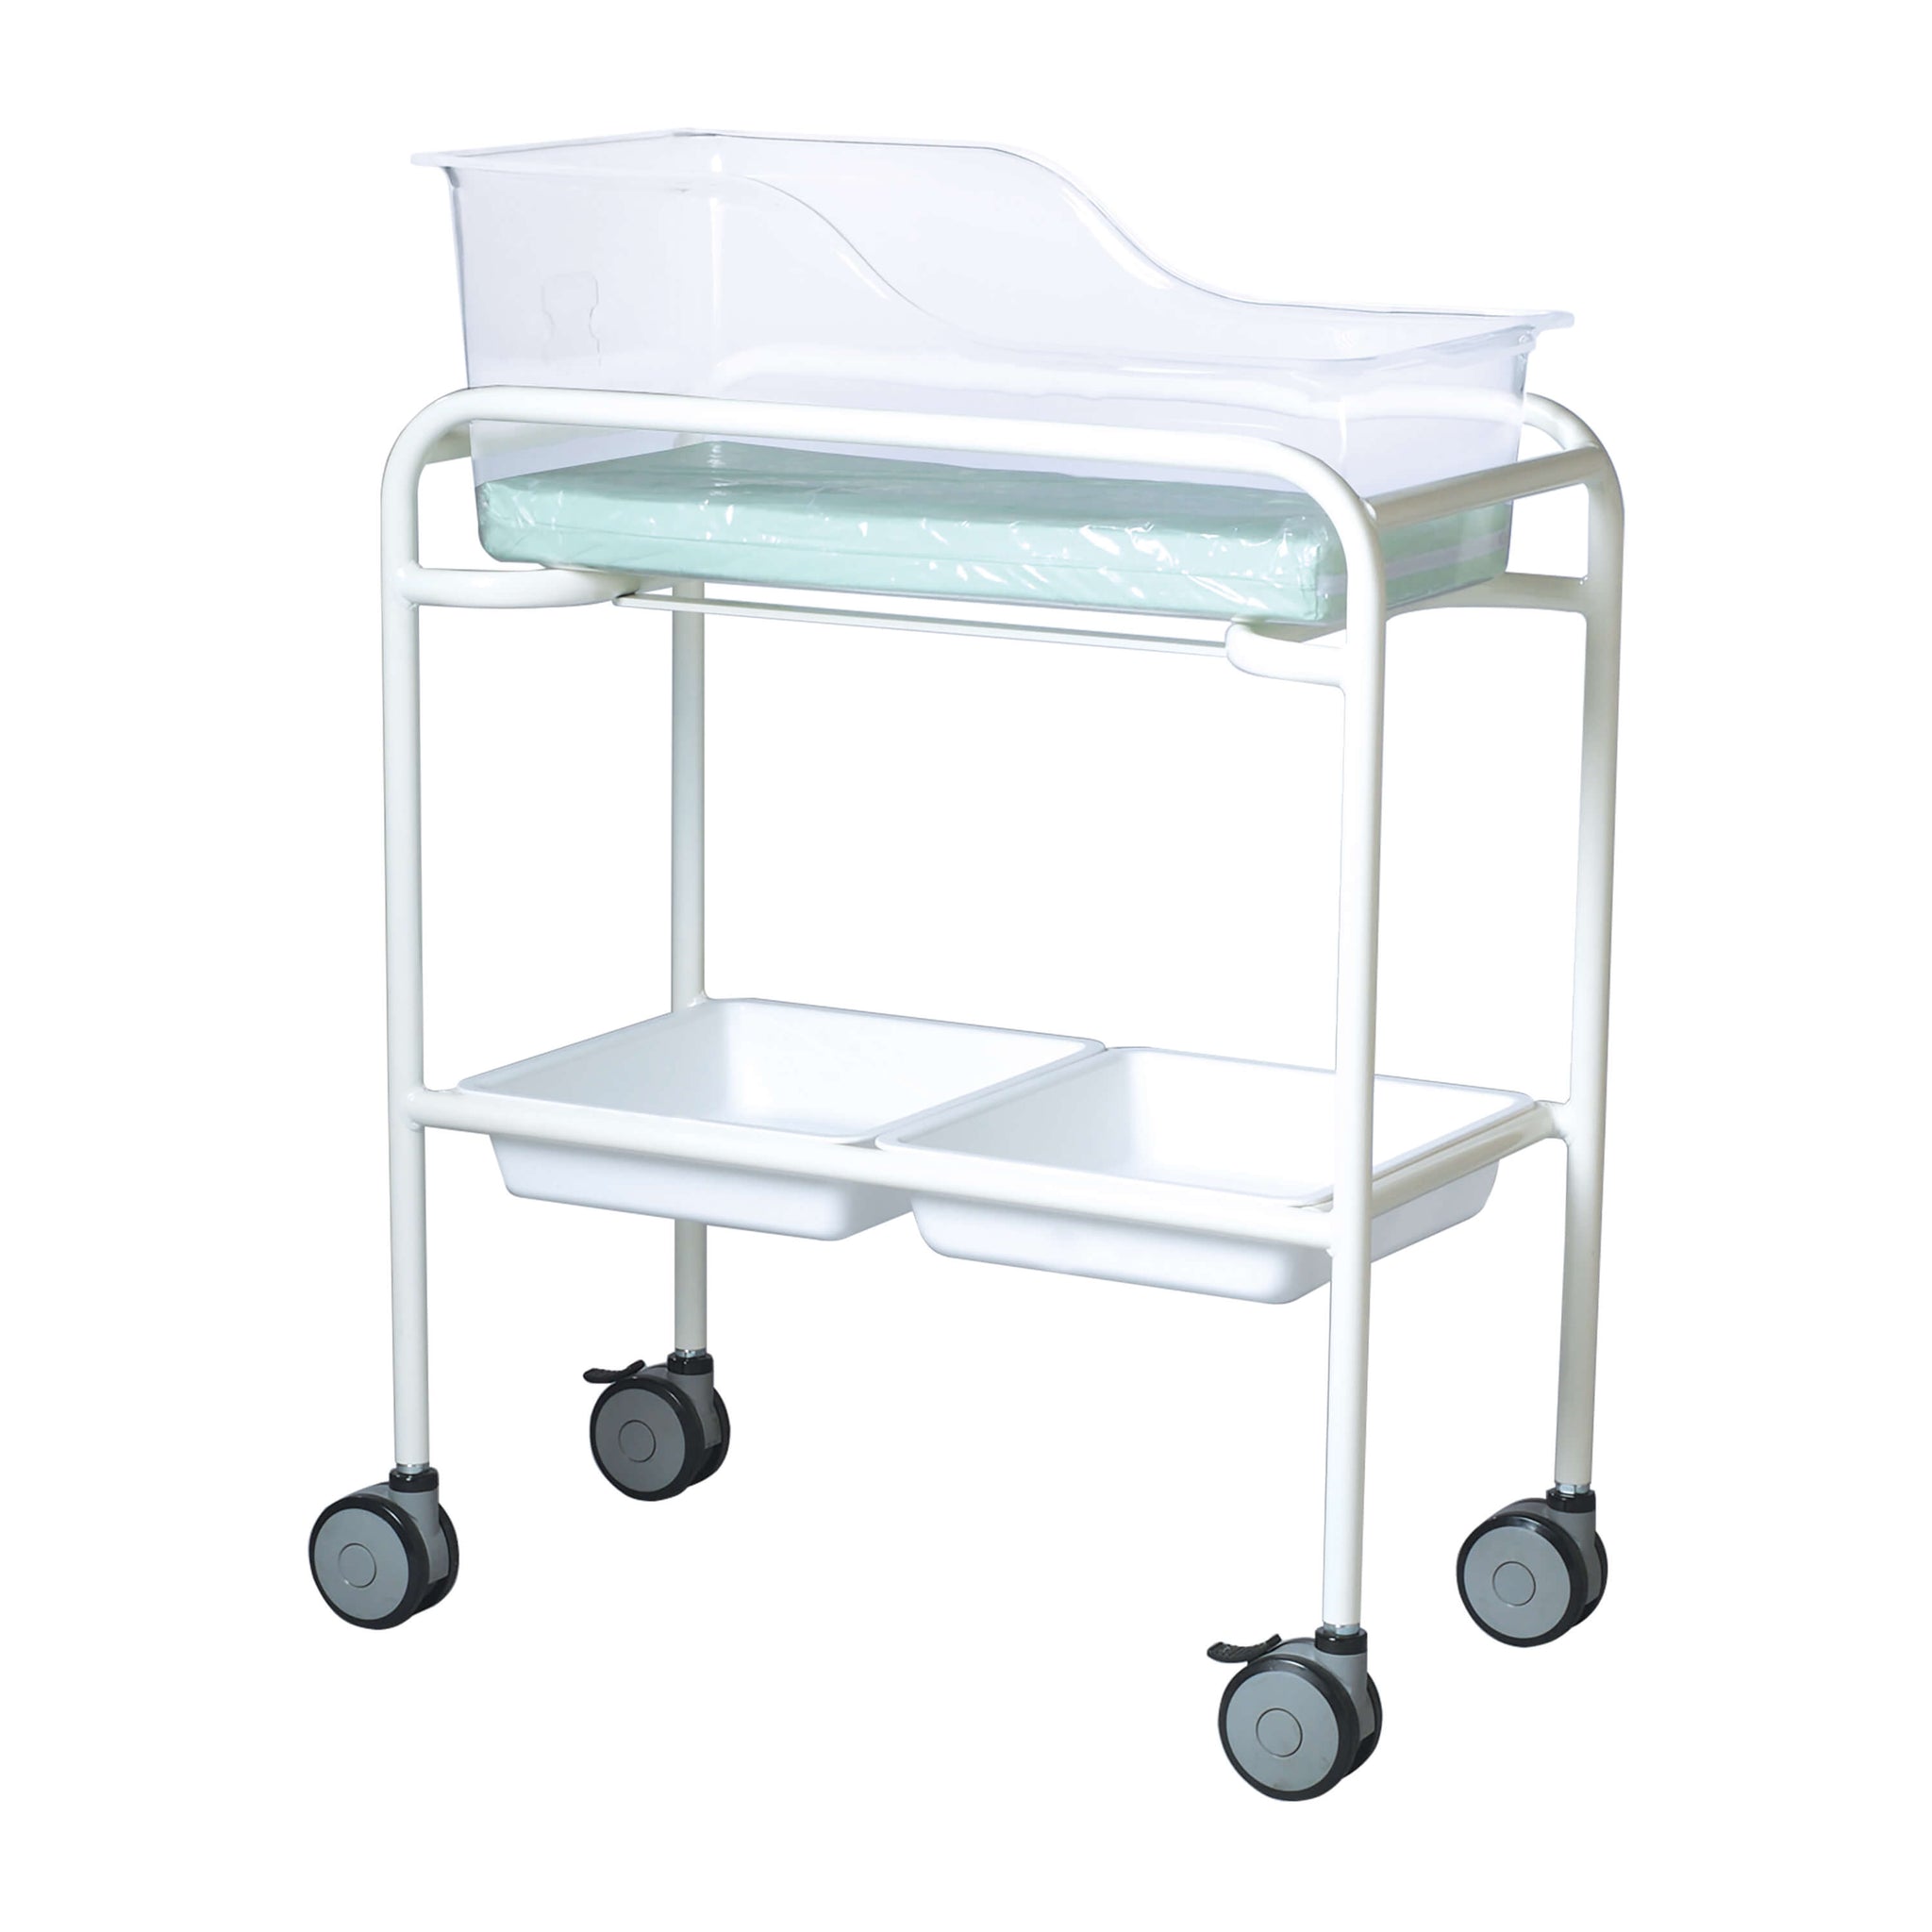 Children's Bassinet Trolley - Single, Fixed Height, Epoxy Coated